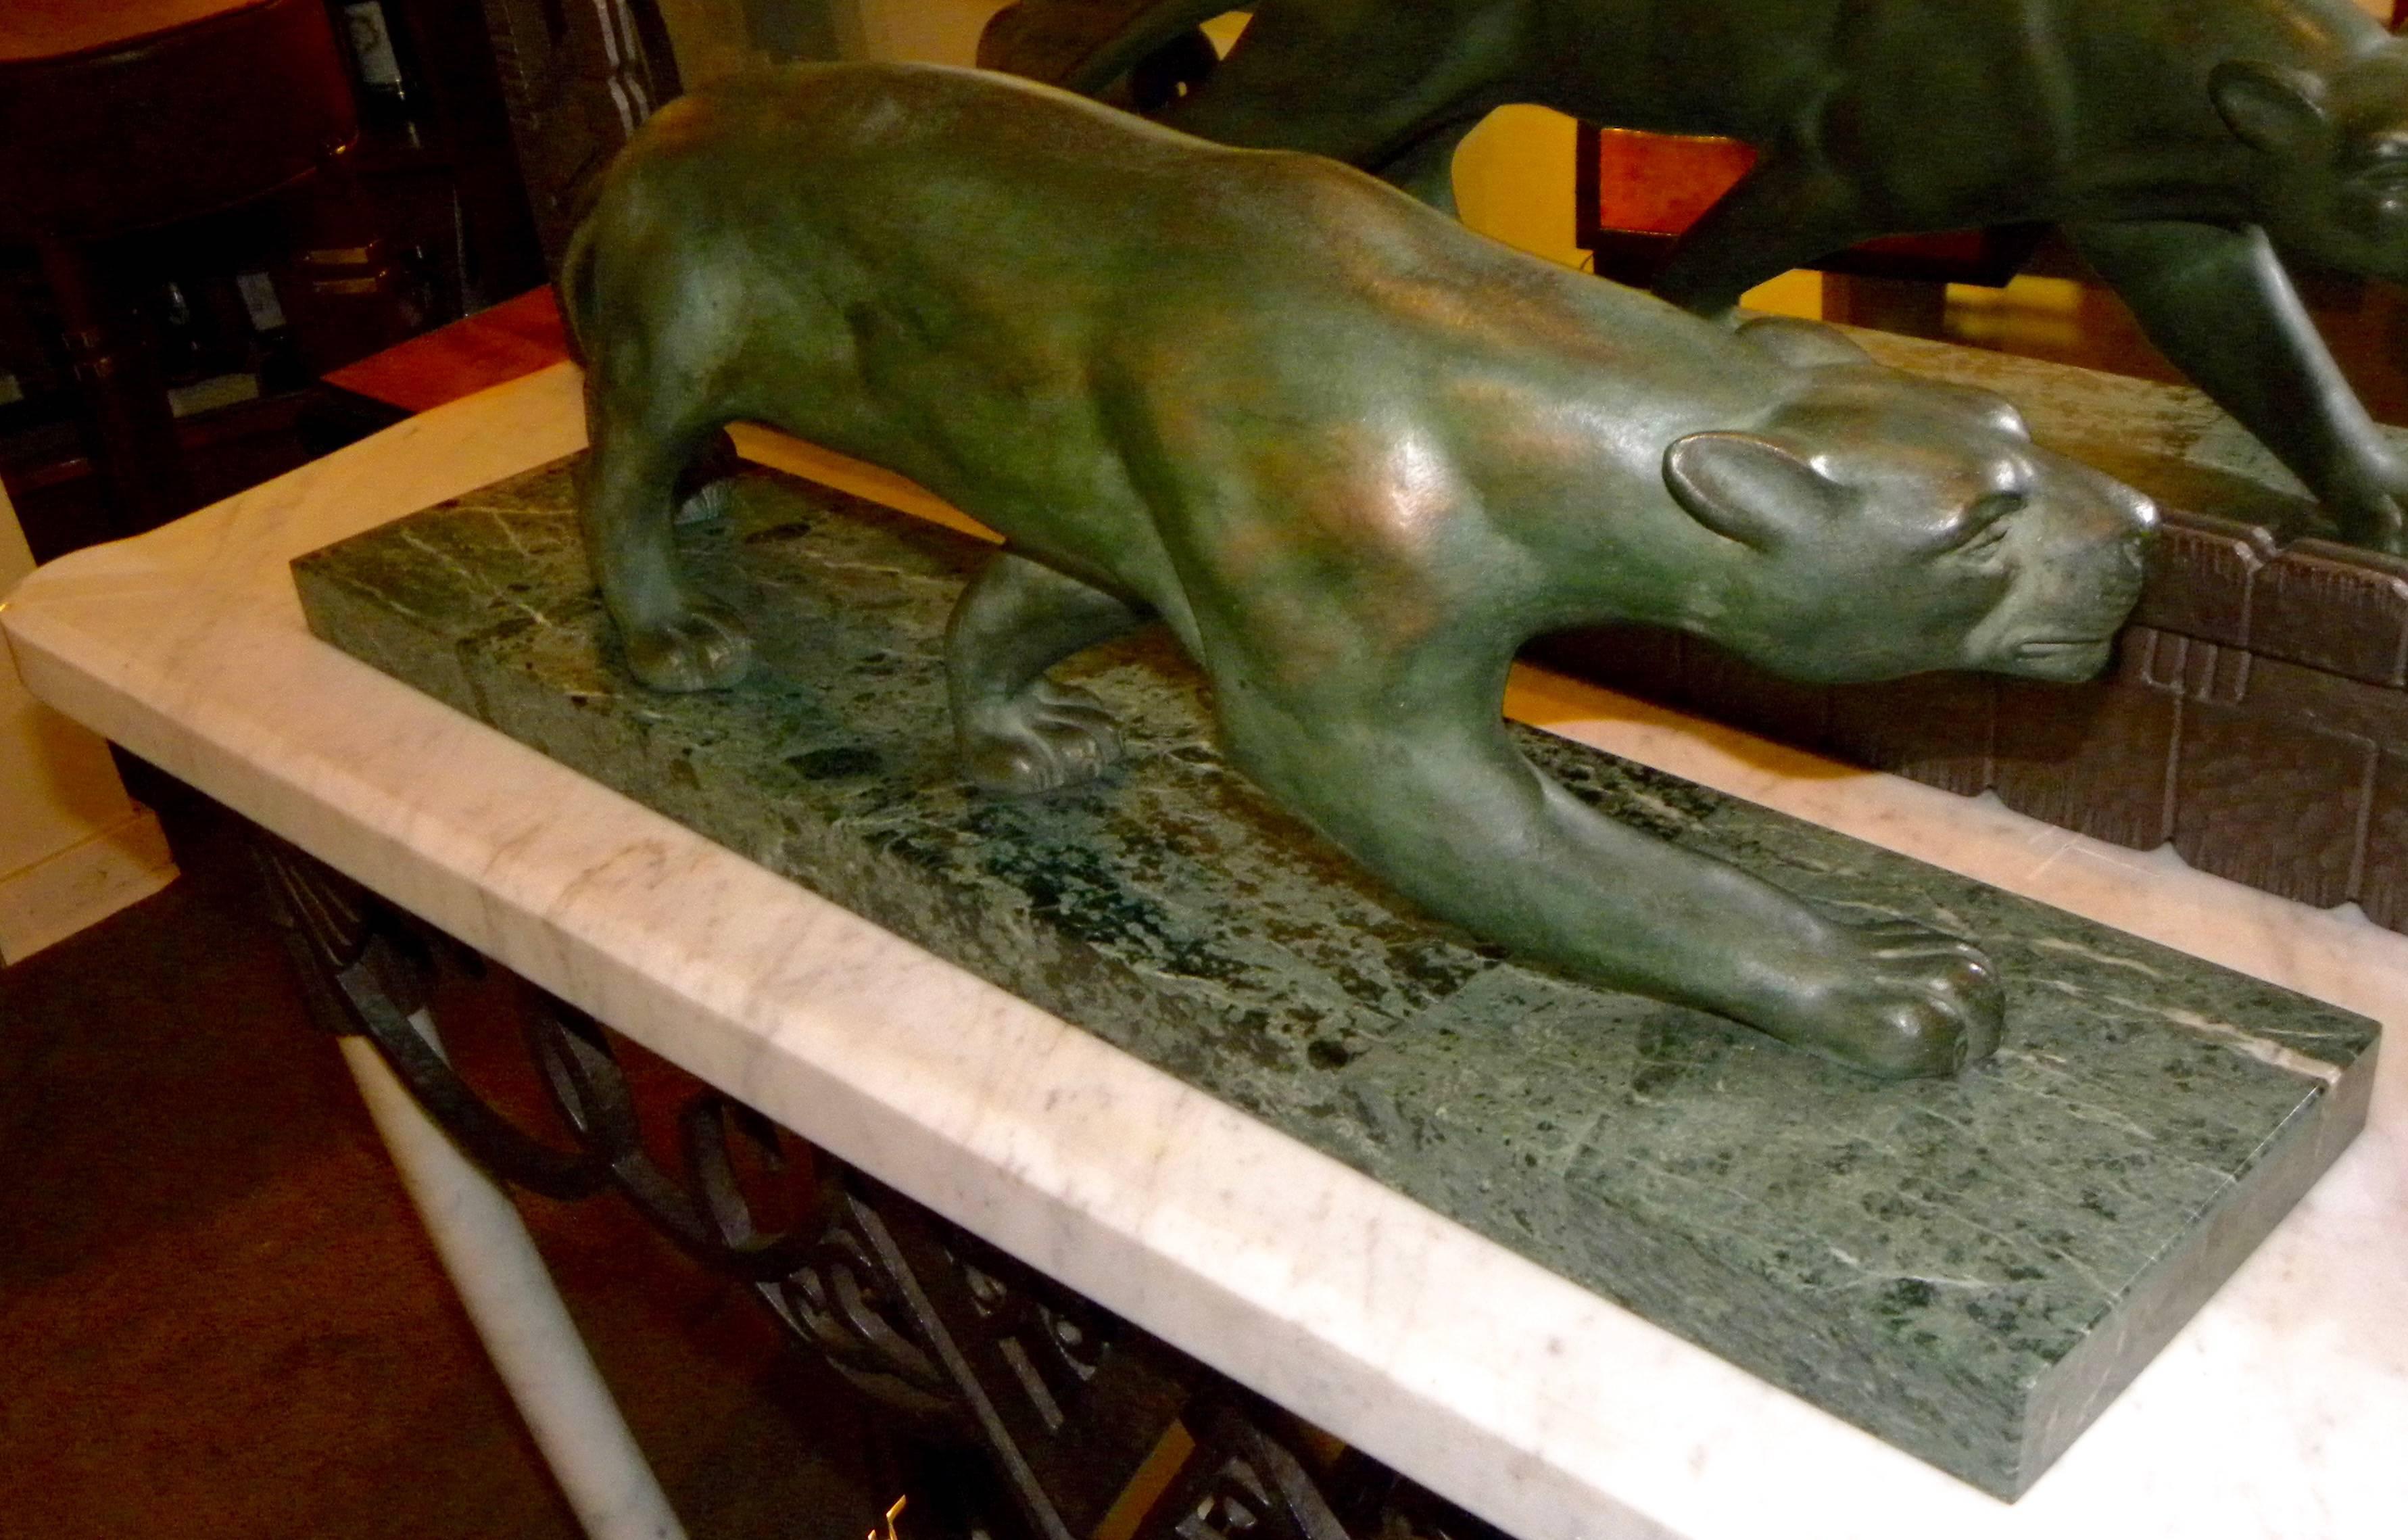 This Art Deco bronze crouching panther is ready to lunge forth in all it’s glory. The jungle cats were an important motif in the deco era as the sylphlike nude female sculpture and in perfect contrast, as these masculine symbols are rendered with